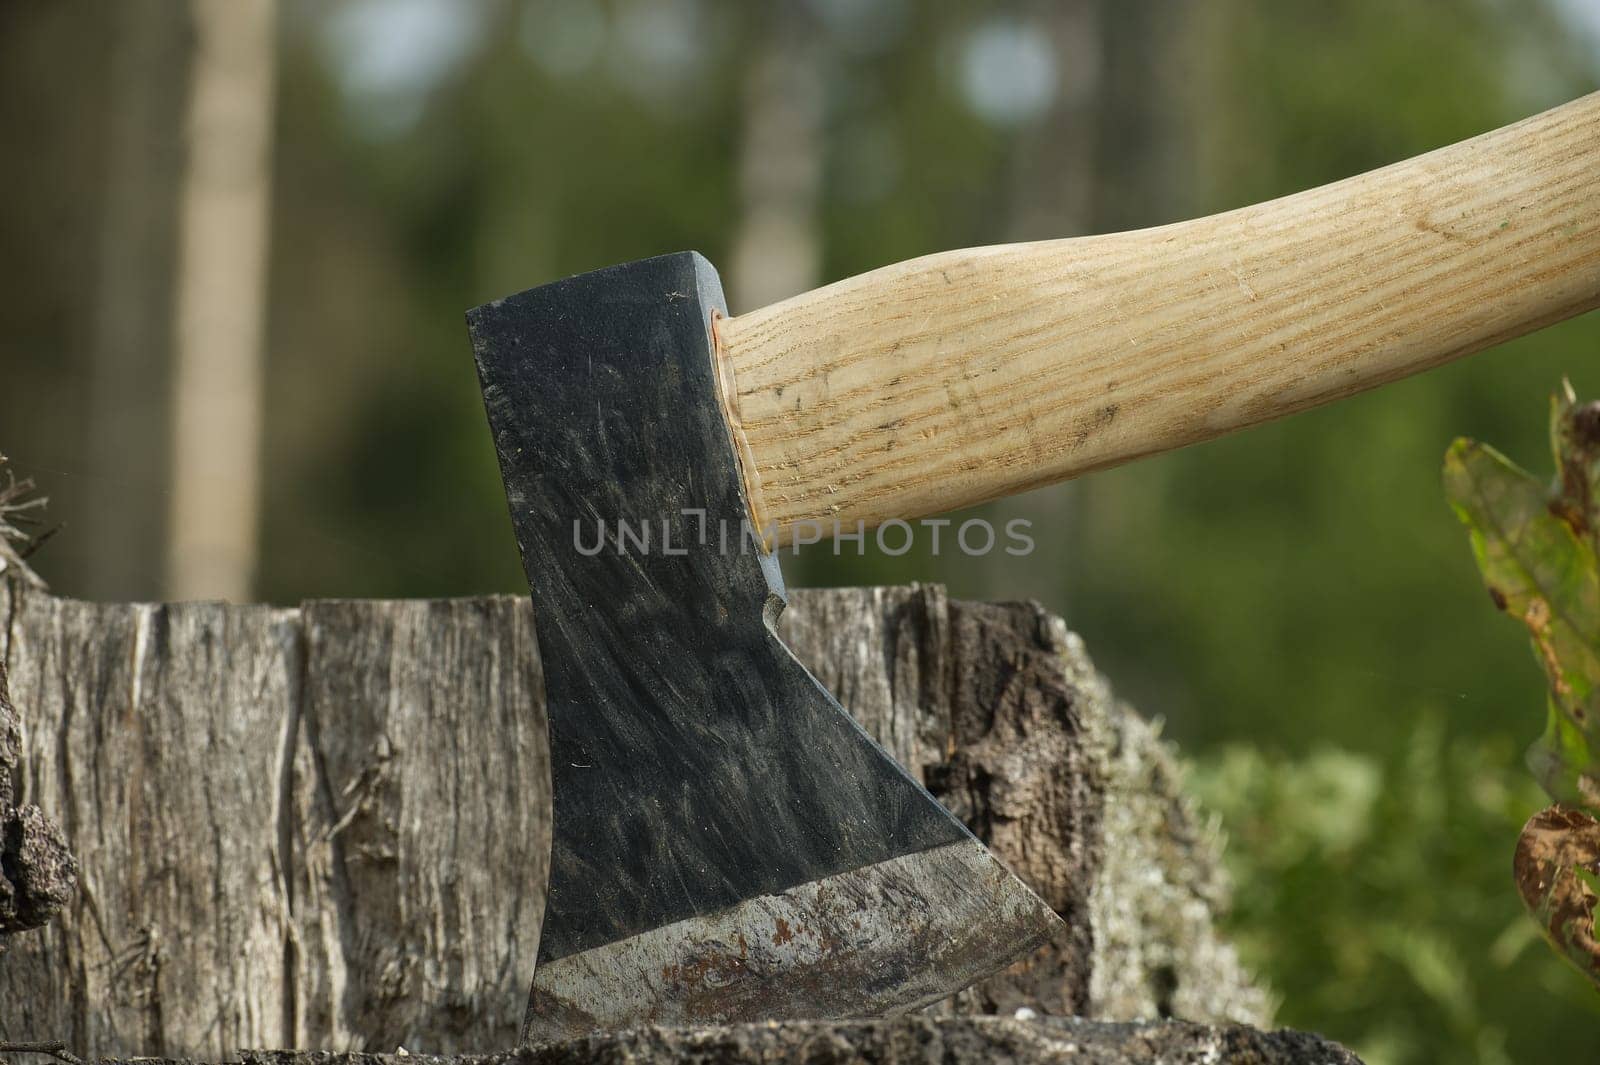 Hatchet or ax stuck in a tree stump against of blured forest background. Deforestation, forest clearance or firewood preparation for winter